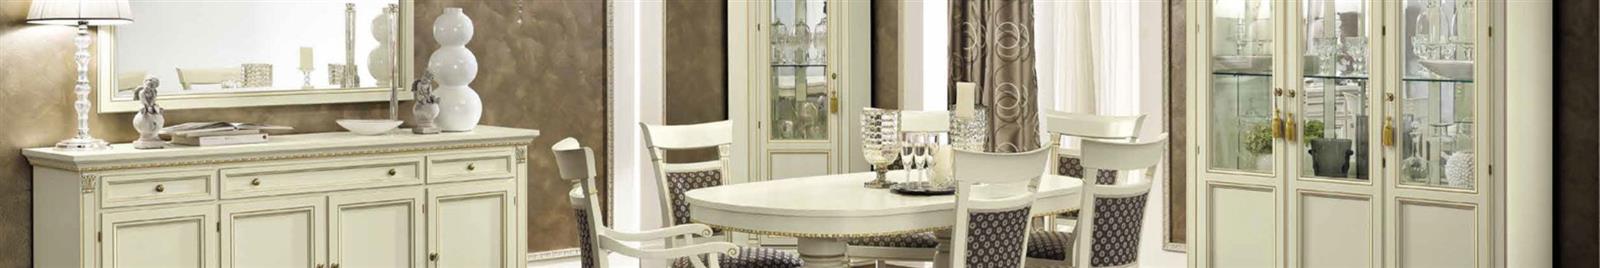 Treviso Day - White Ash - Classic Italian Dining Room Furniture